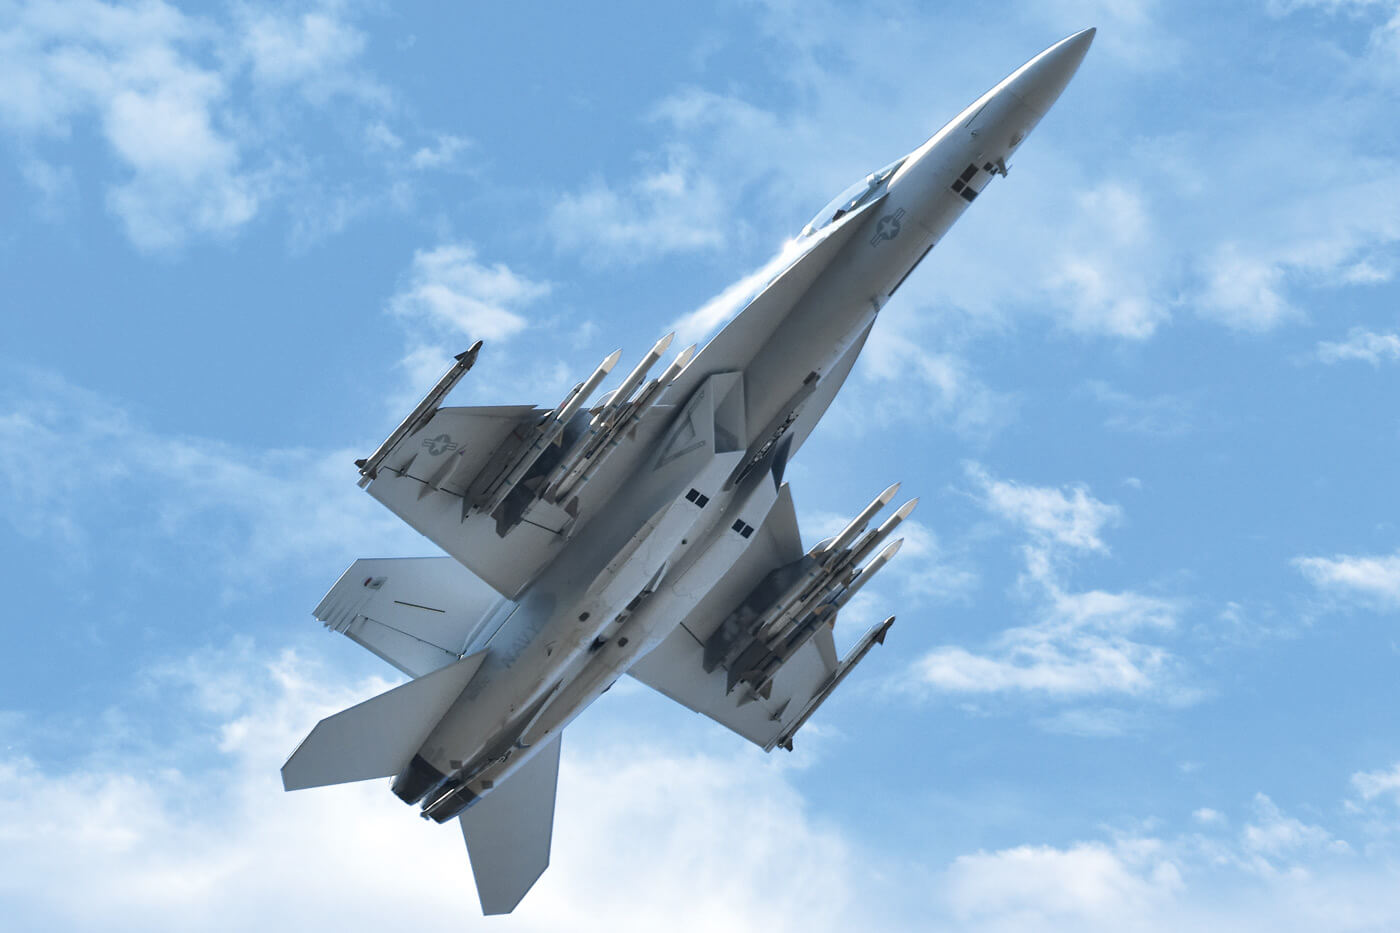 With 76 aging CF-188s operating at a serviceability rate of roughly 50 per cent, Canada’s current ability to meet its NATO and NORAD obligations simultaneously is severely limited. Enter the interim fleet of 18 Boeing F/A-18 Super Hornets. Jeff Wilson Photo